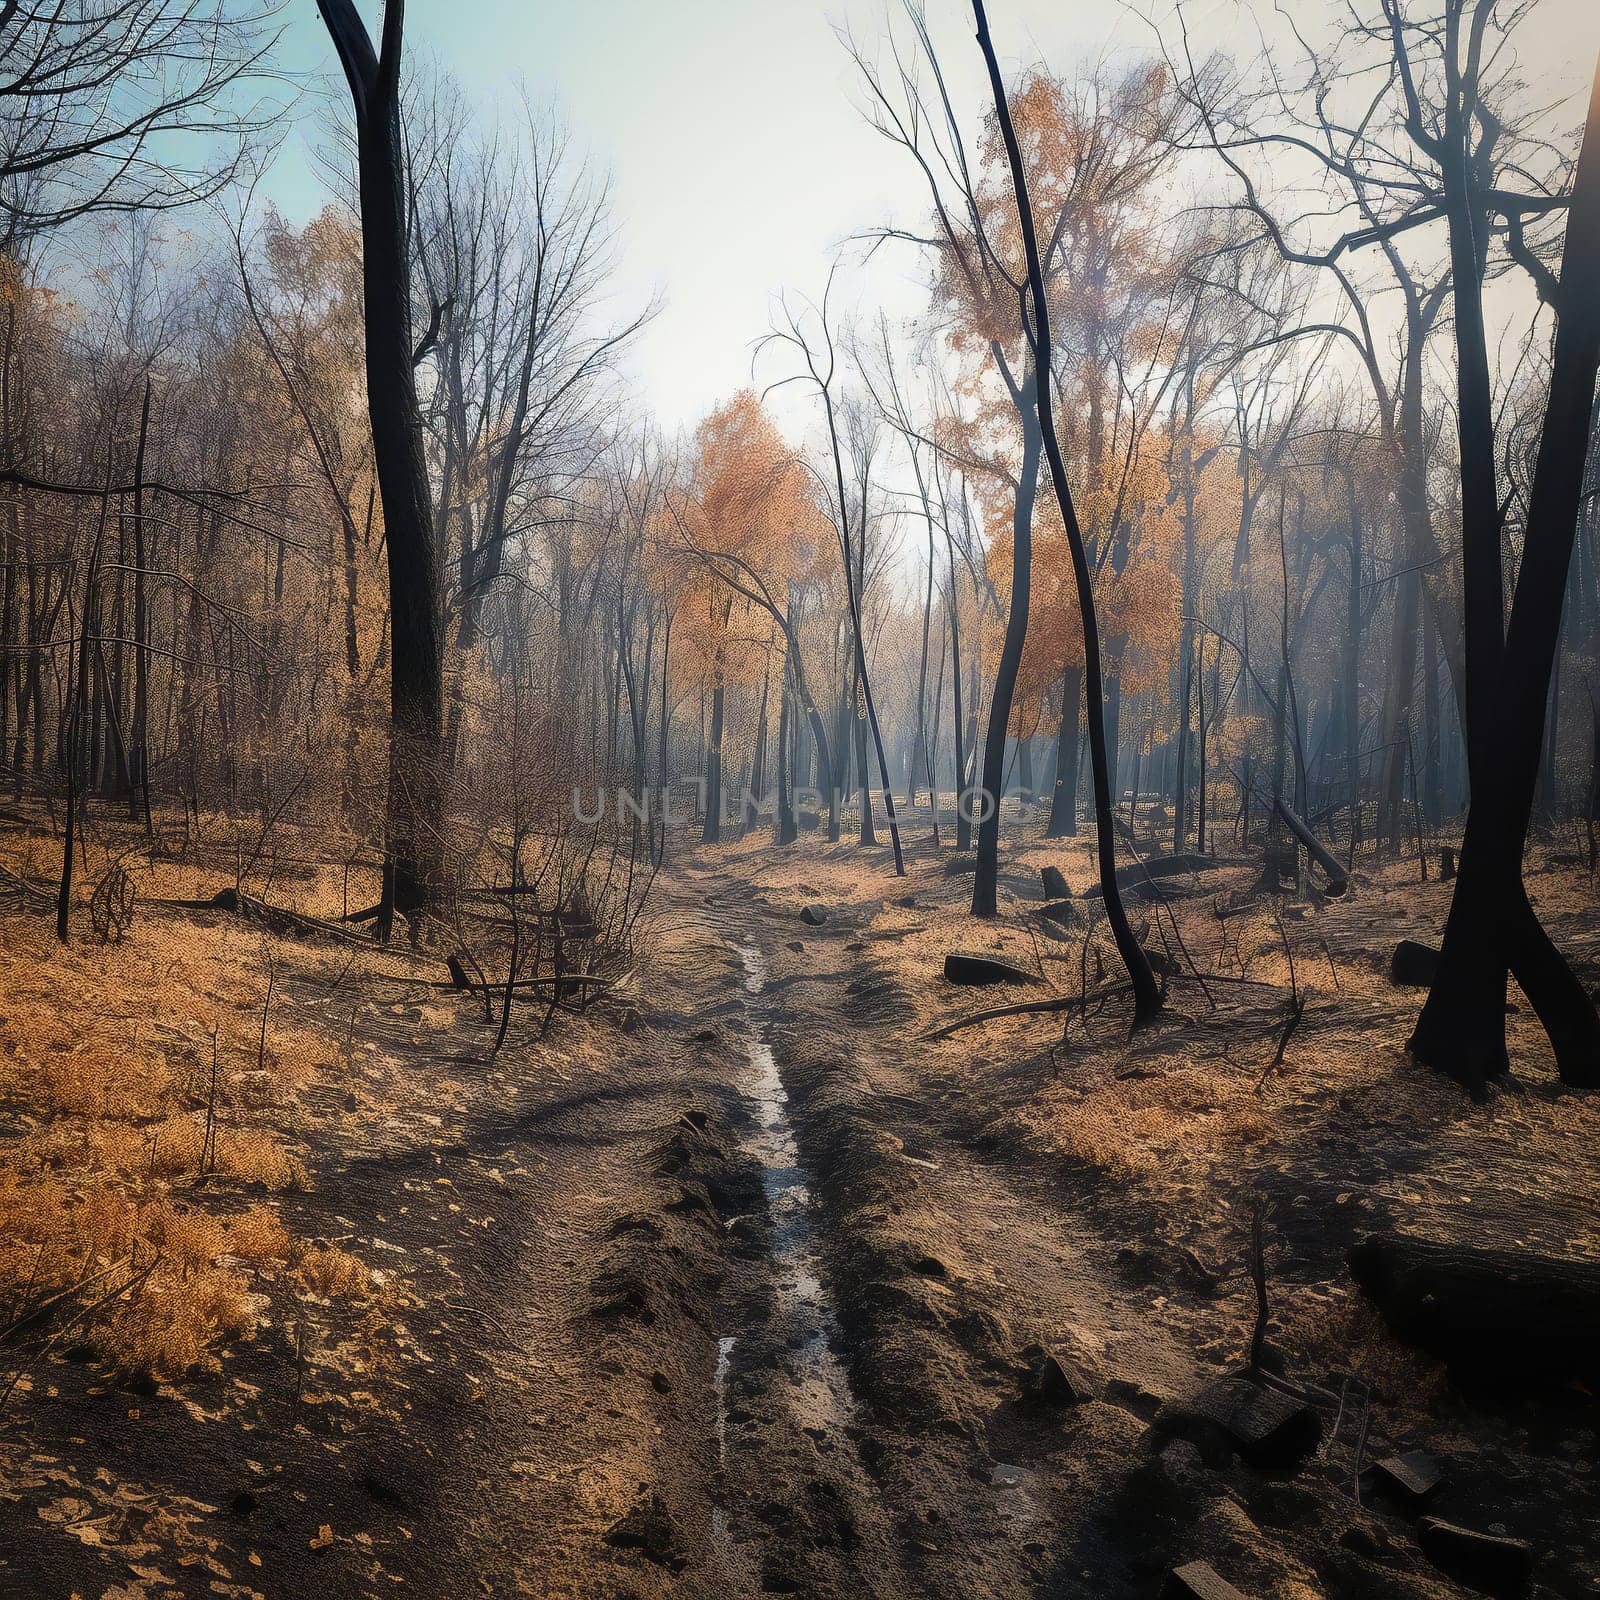 Charred and blackened forest after a fire has passed through